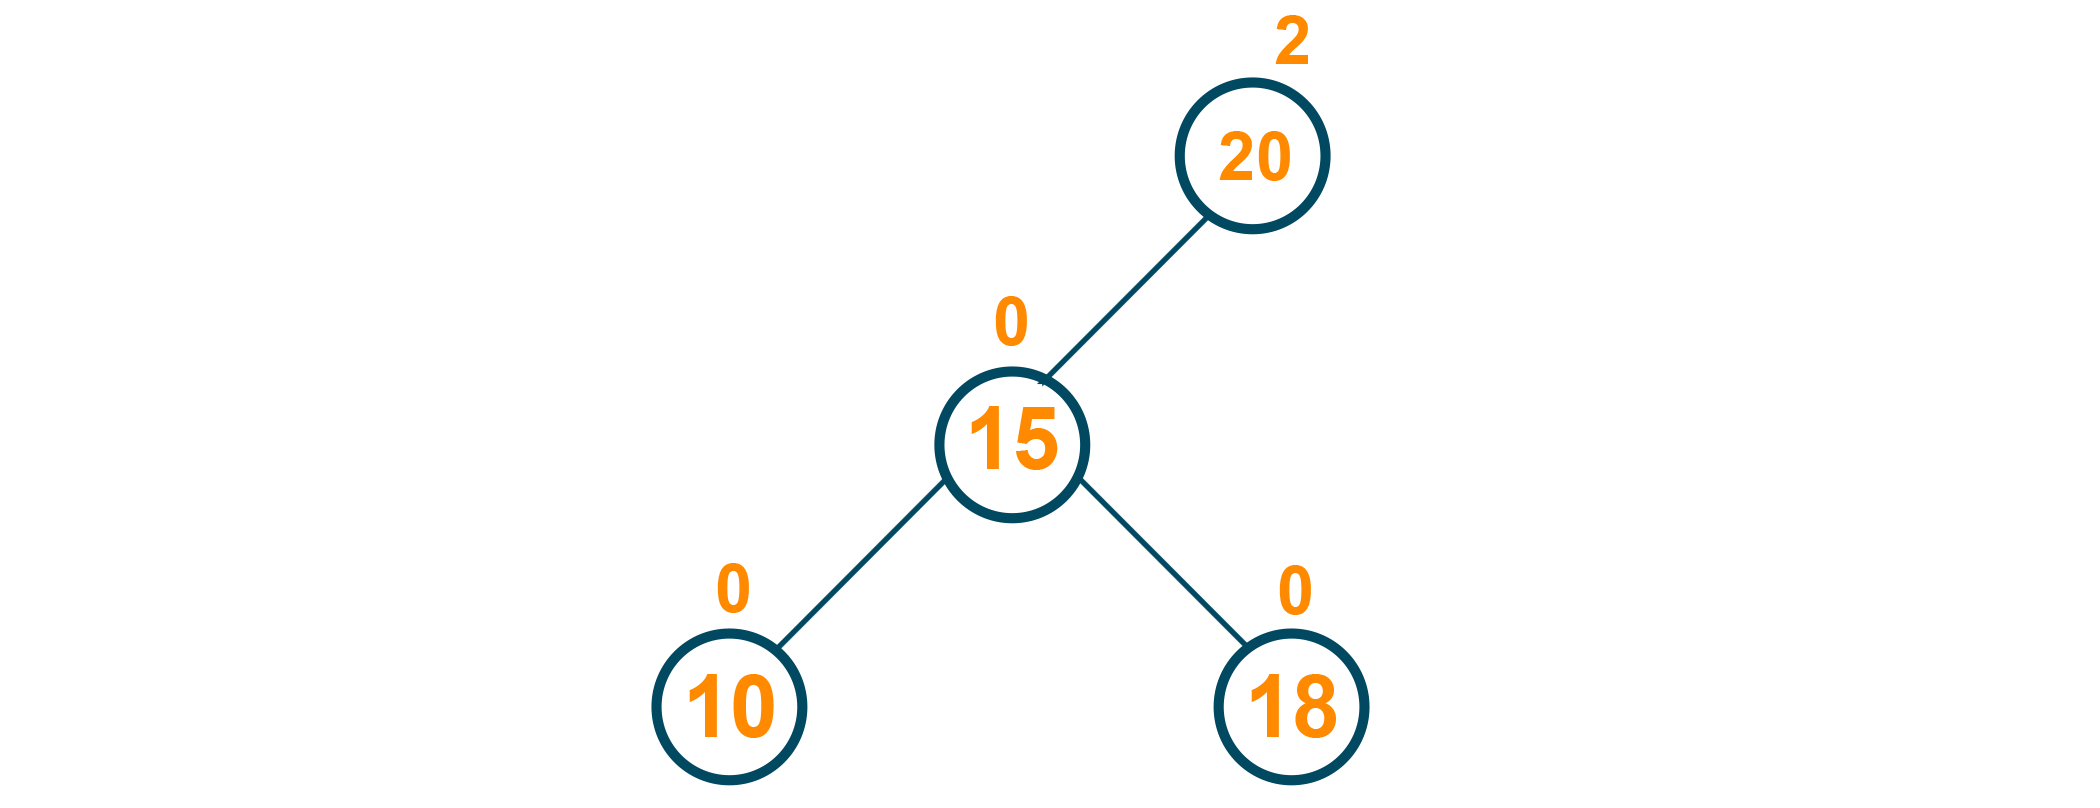 Deleting the node 25 from the AVL Tree